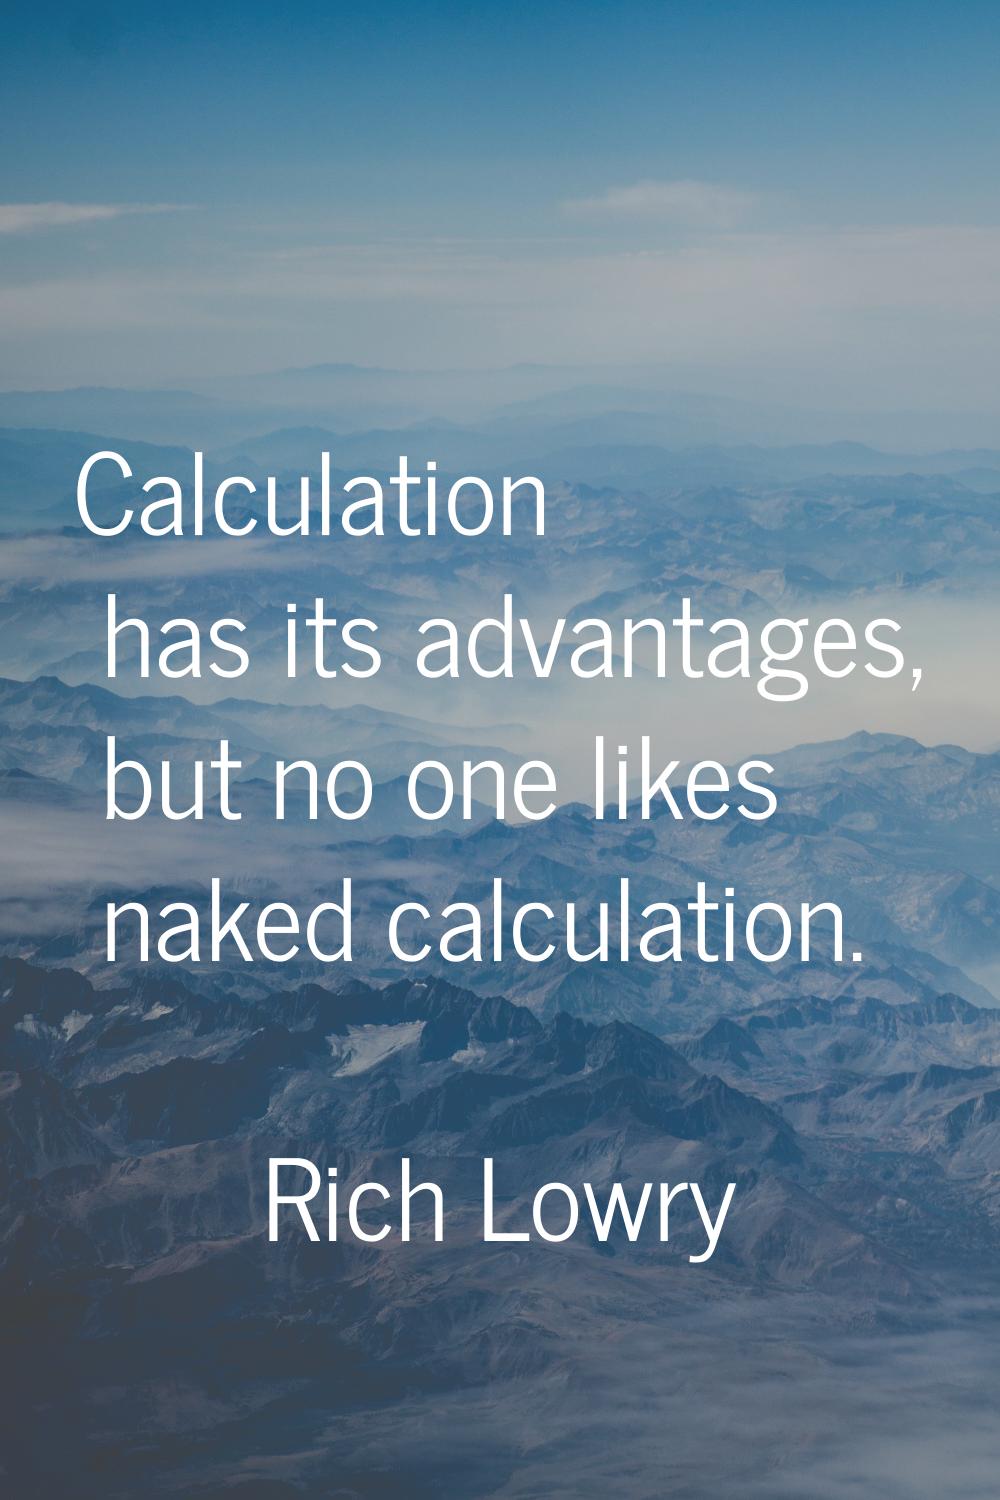 Calculation has its advantages, but no one likes naked calculation.